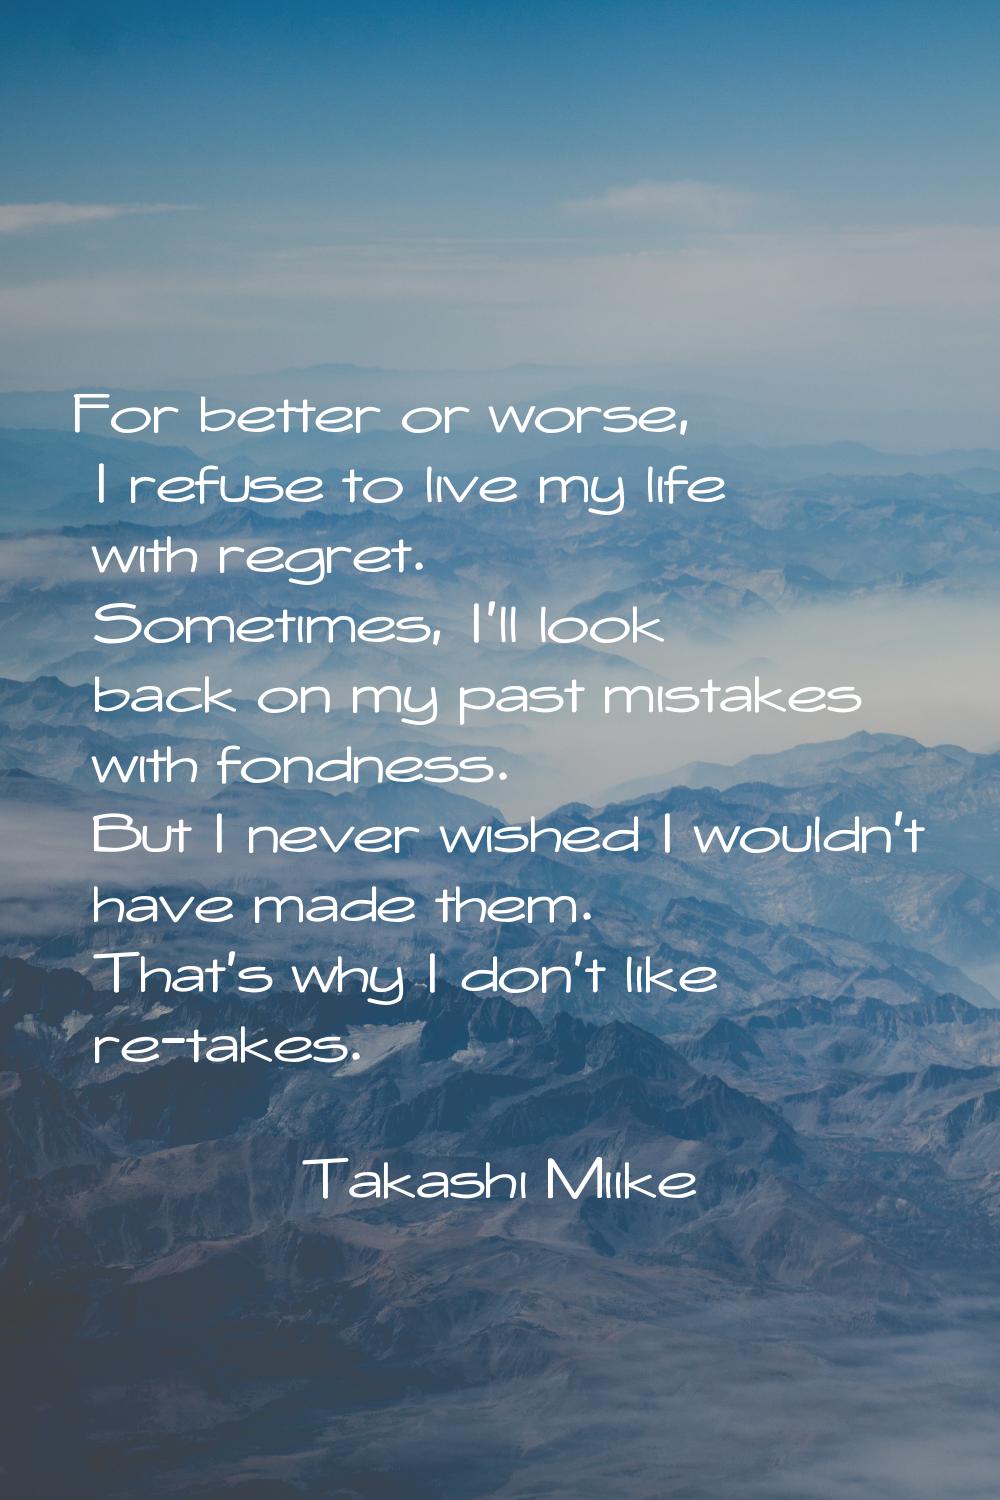 For better or worse, I refuse to live my life with regret. Sometimes, I'll look back on my past mis